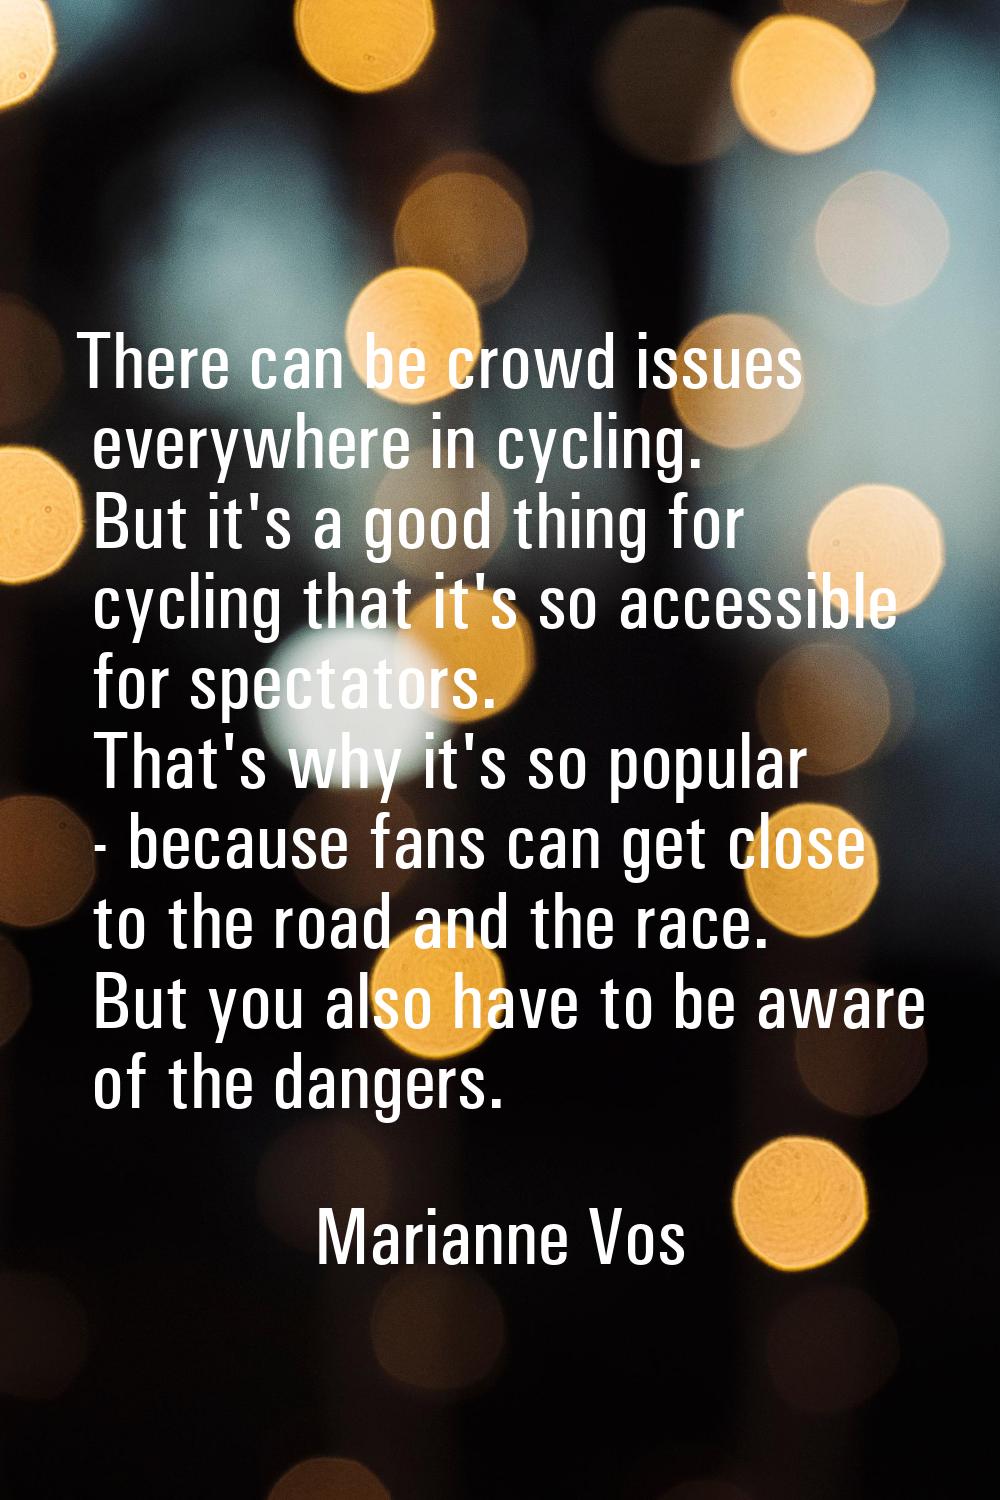 There can be crowd issues everywhere in cycling. But it's a good thing for cycling that it's so acc